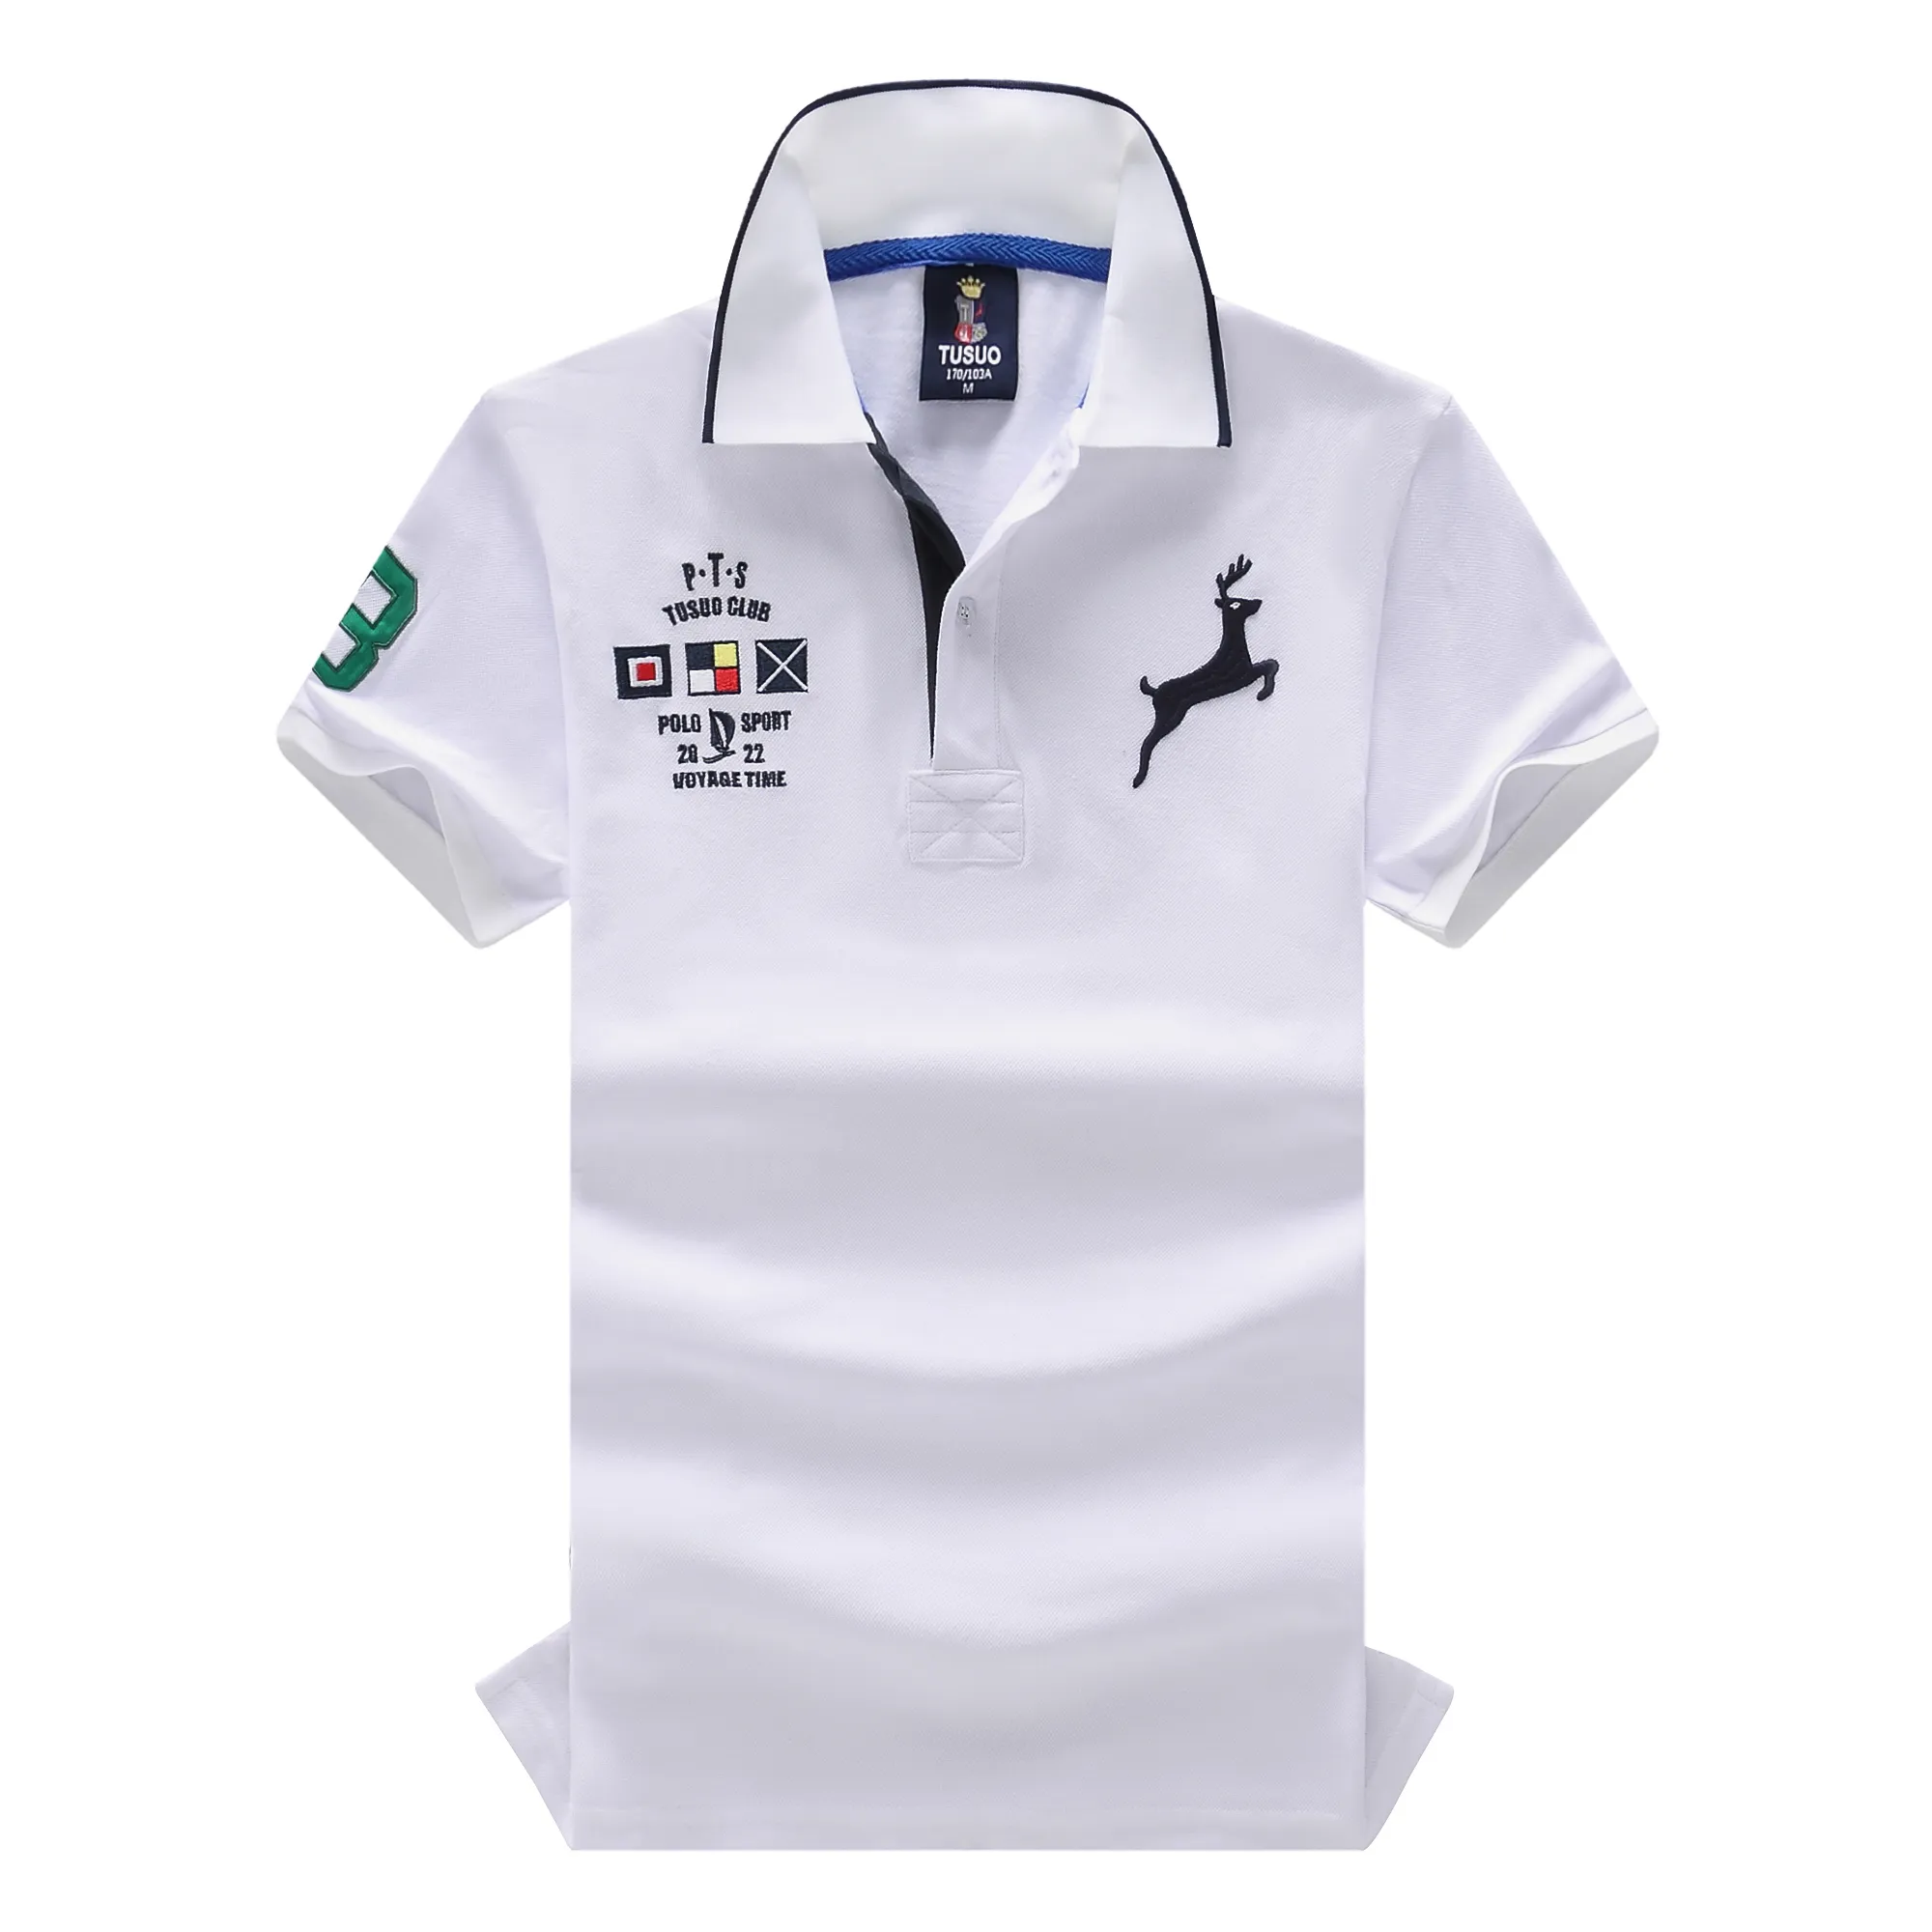 Designer's New Summer Style Polo Shirt with Pure Cotton Turn-down Collar and Unique Embroidered Patterns